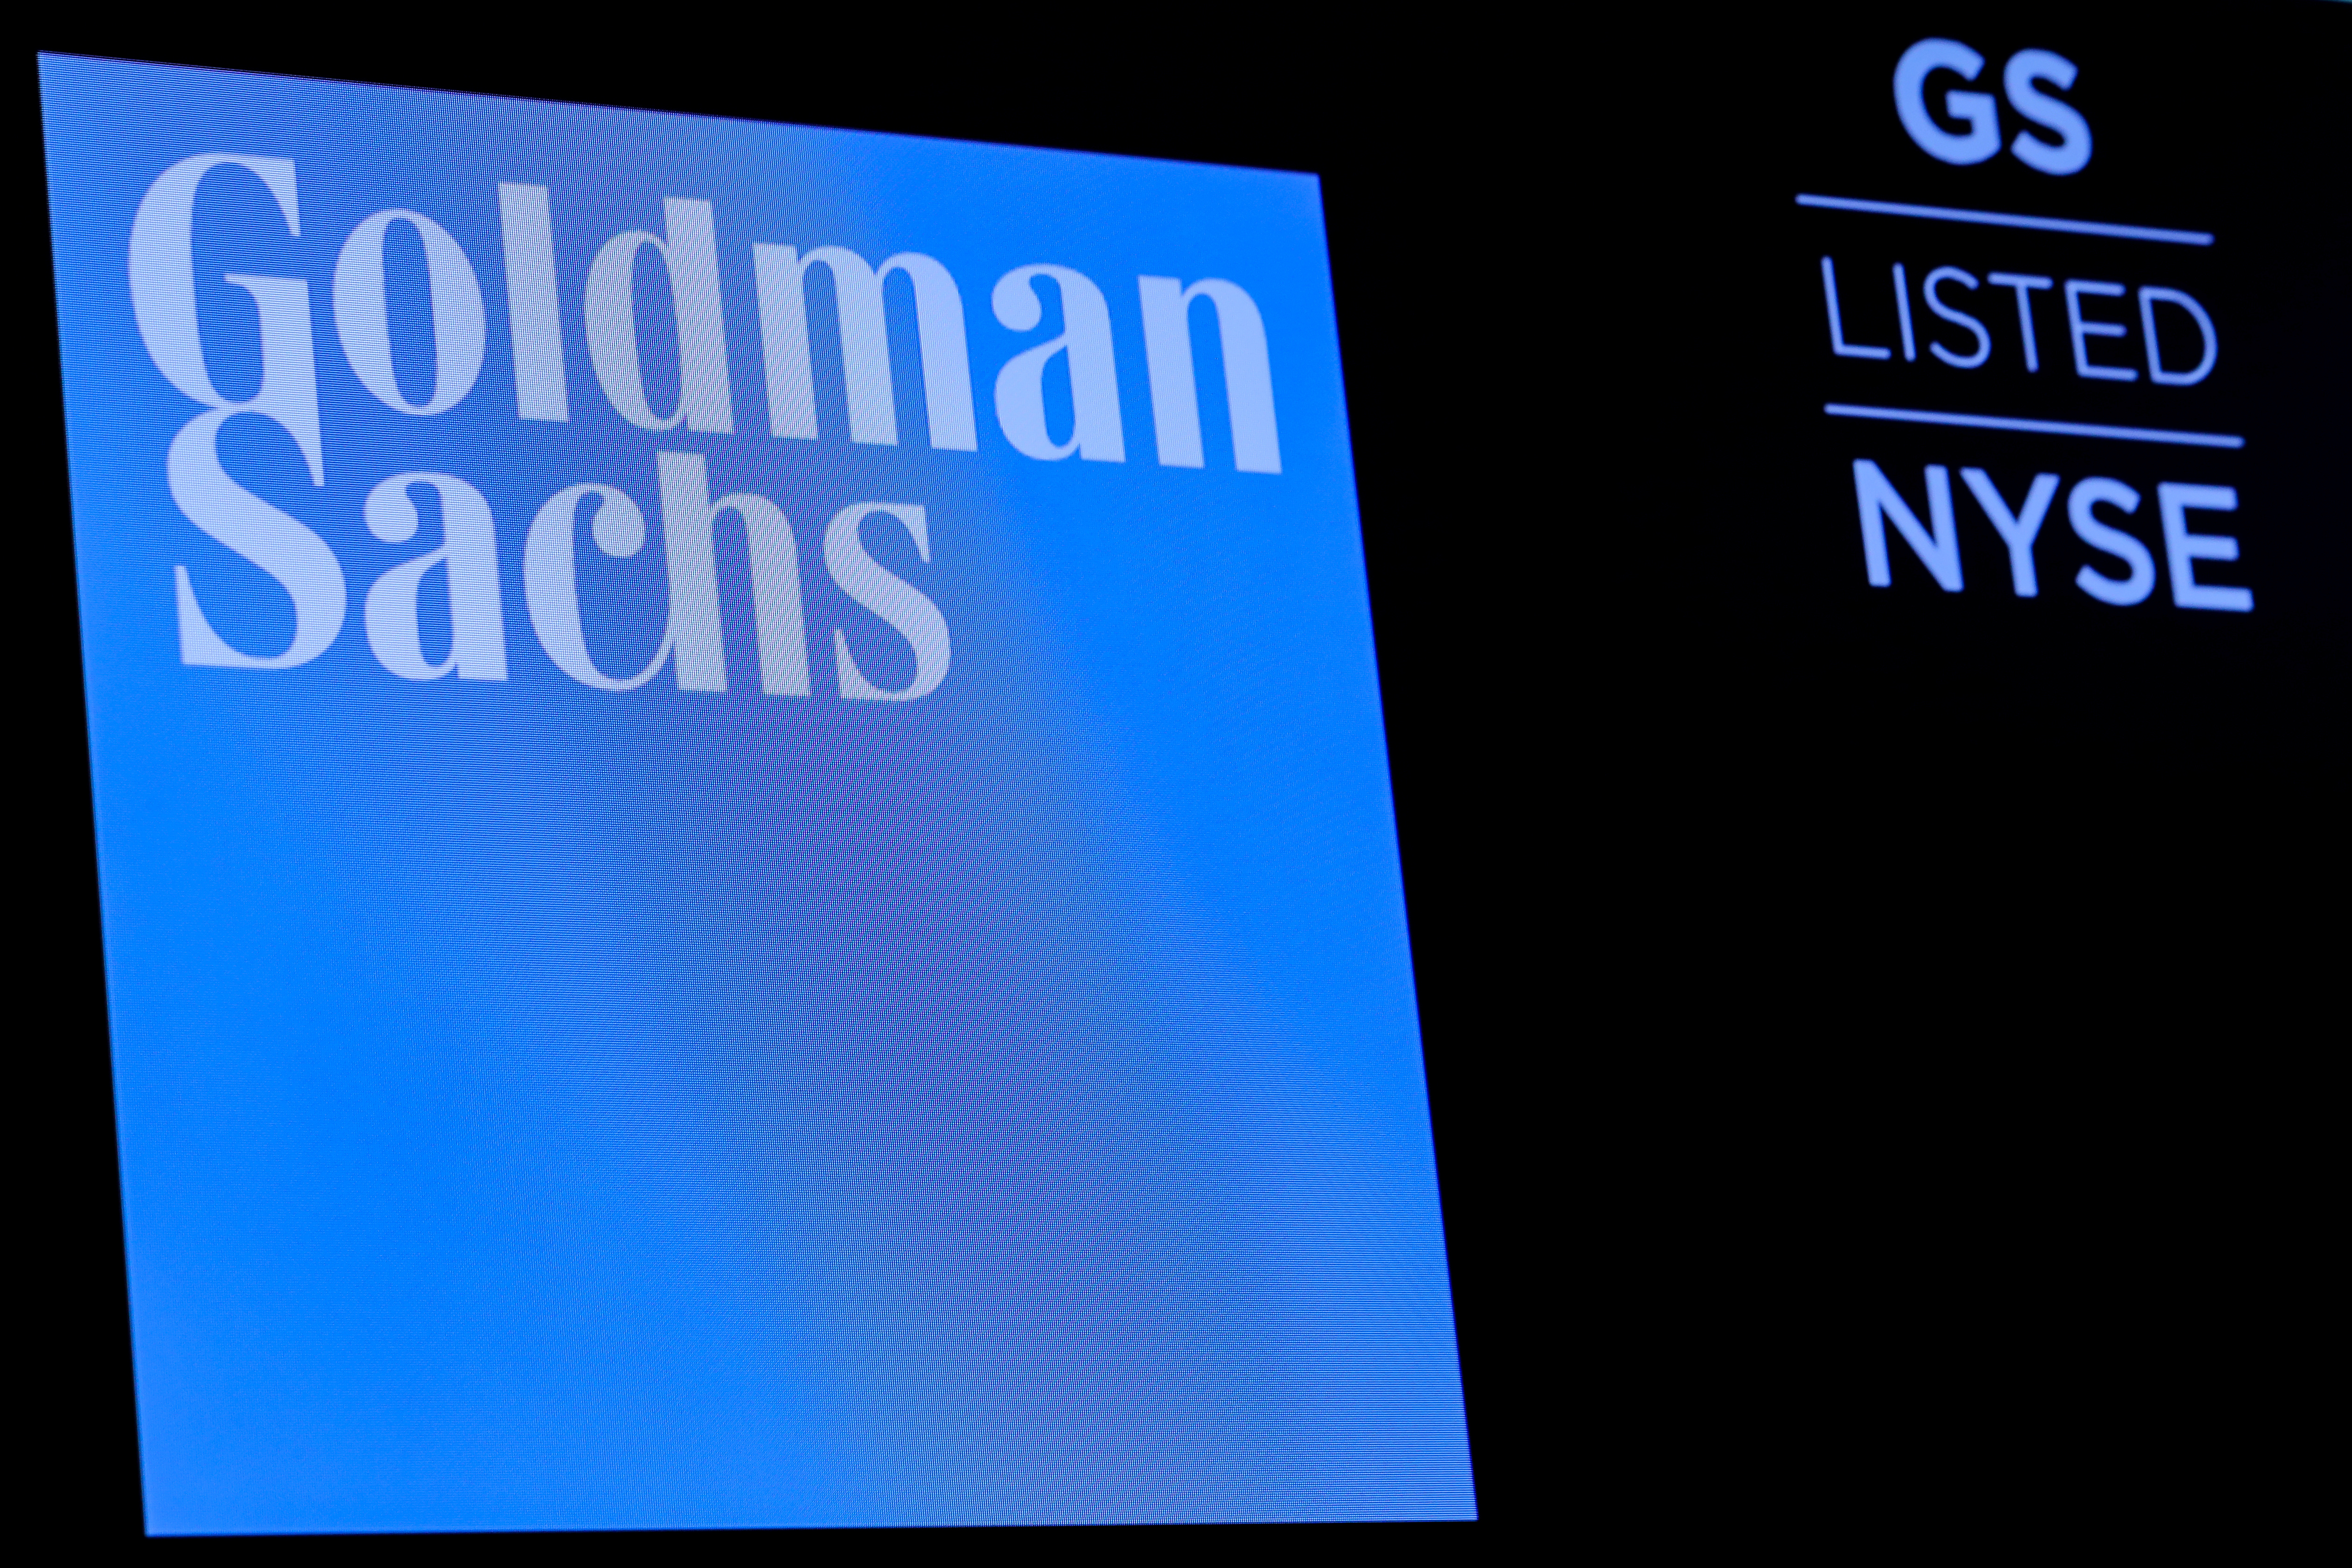 The ticker symbol and logo for Goldman Sachs is displayed on a screen on the floor at the NYSE in New York